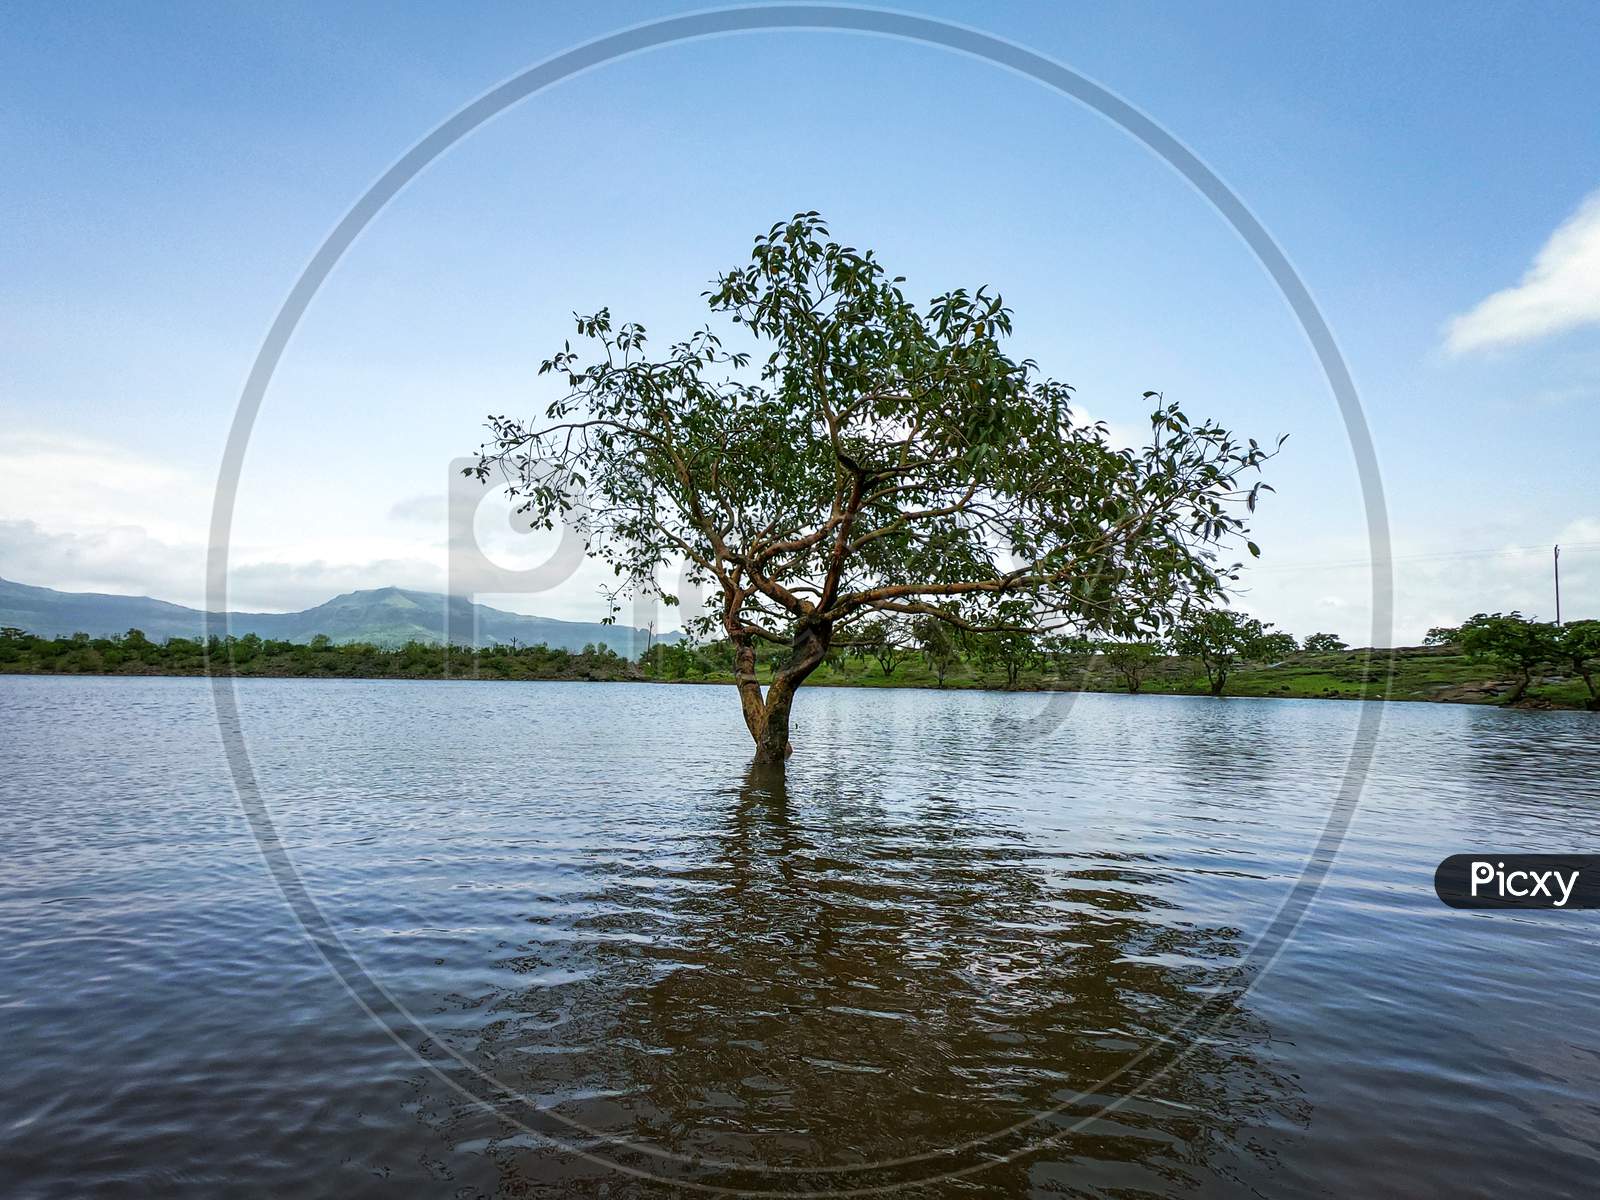 A tree submerged in water